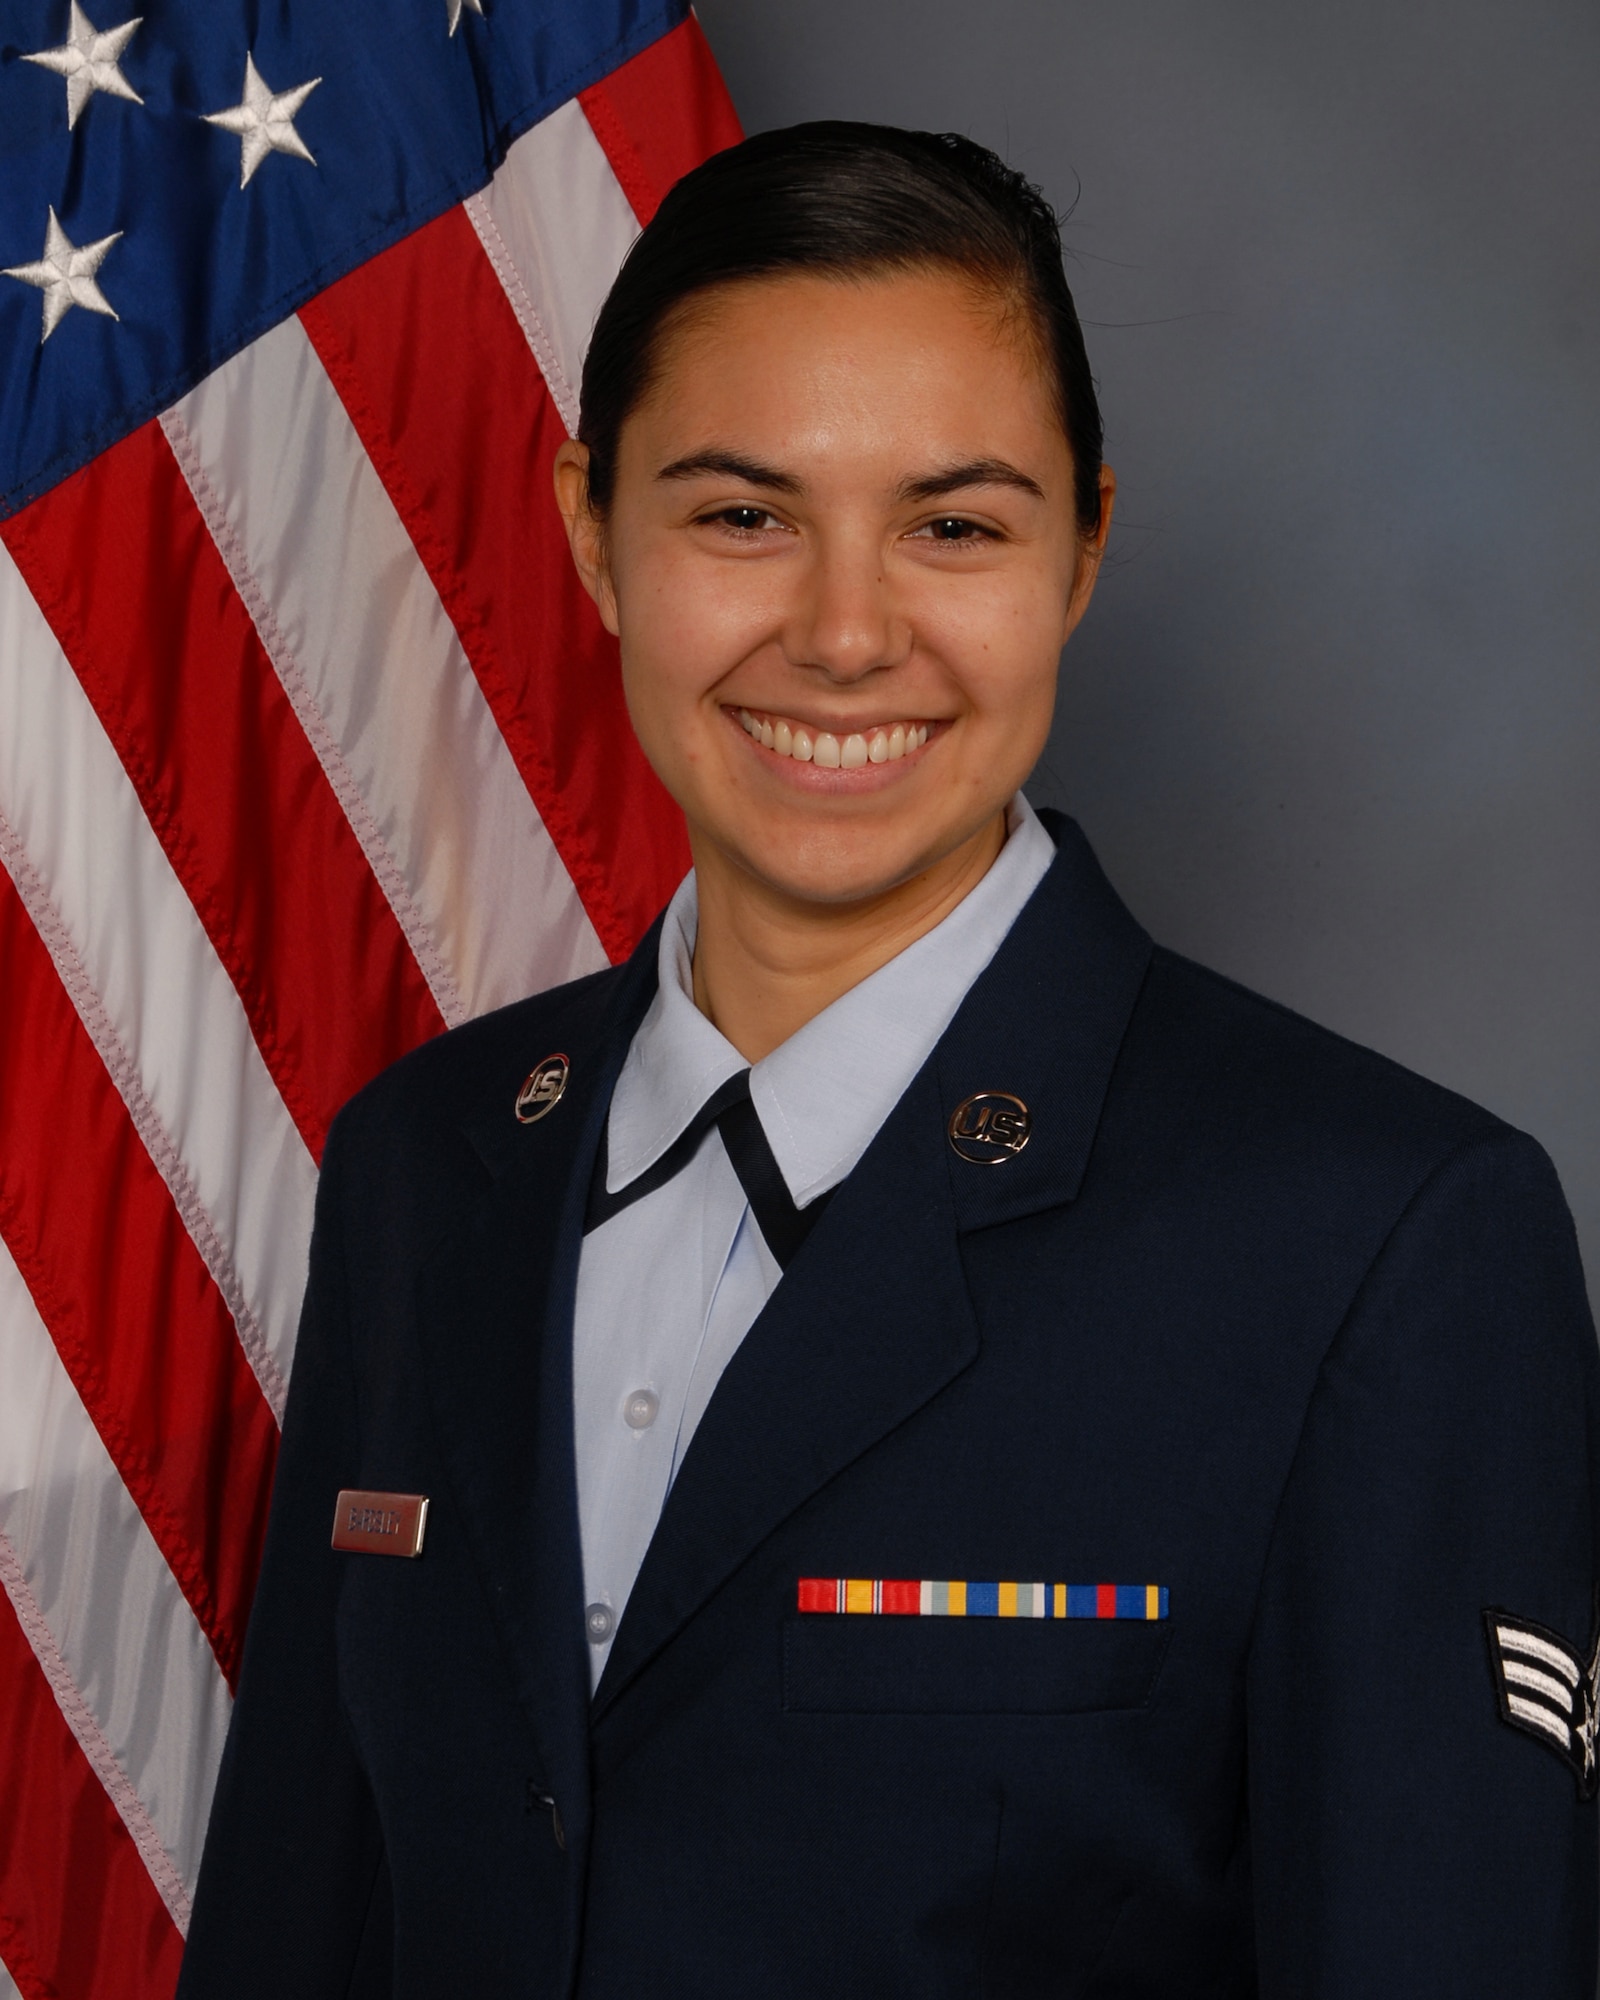 U.S. Air Force Senior Airman Christiana D. Bardsley poses for an official photo Jan. 5, 2020. Bardsley, of the 143rd Airlift Wing, Rhode Island Air National Guard, was selected as the Air National Guard 2020 Outstanding Airman of the Year. (Courtesy Photo)